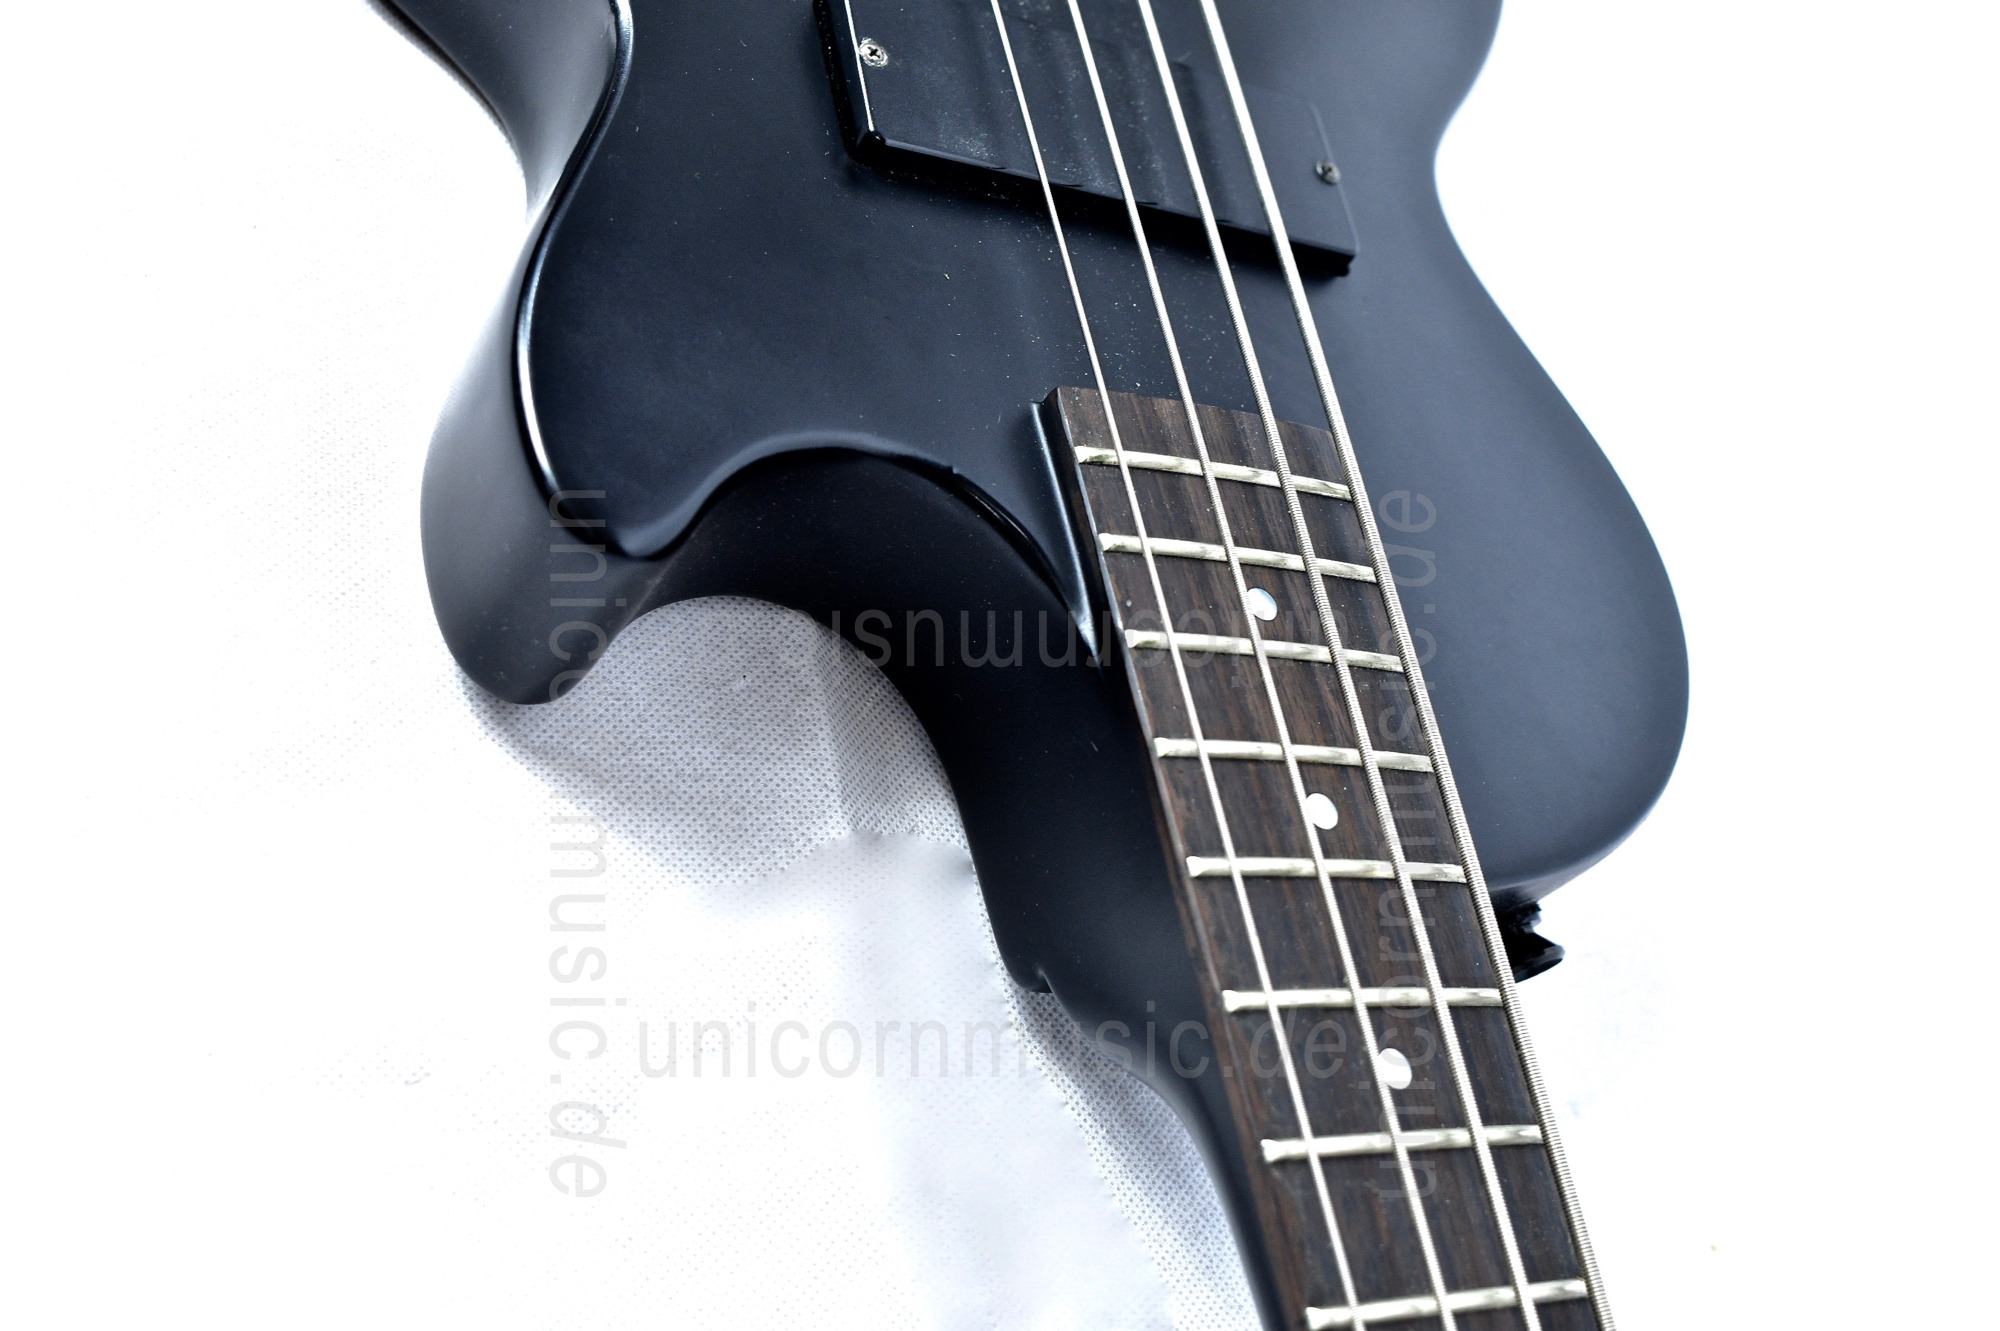 to article description / price Epiphone Jazz Bass